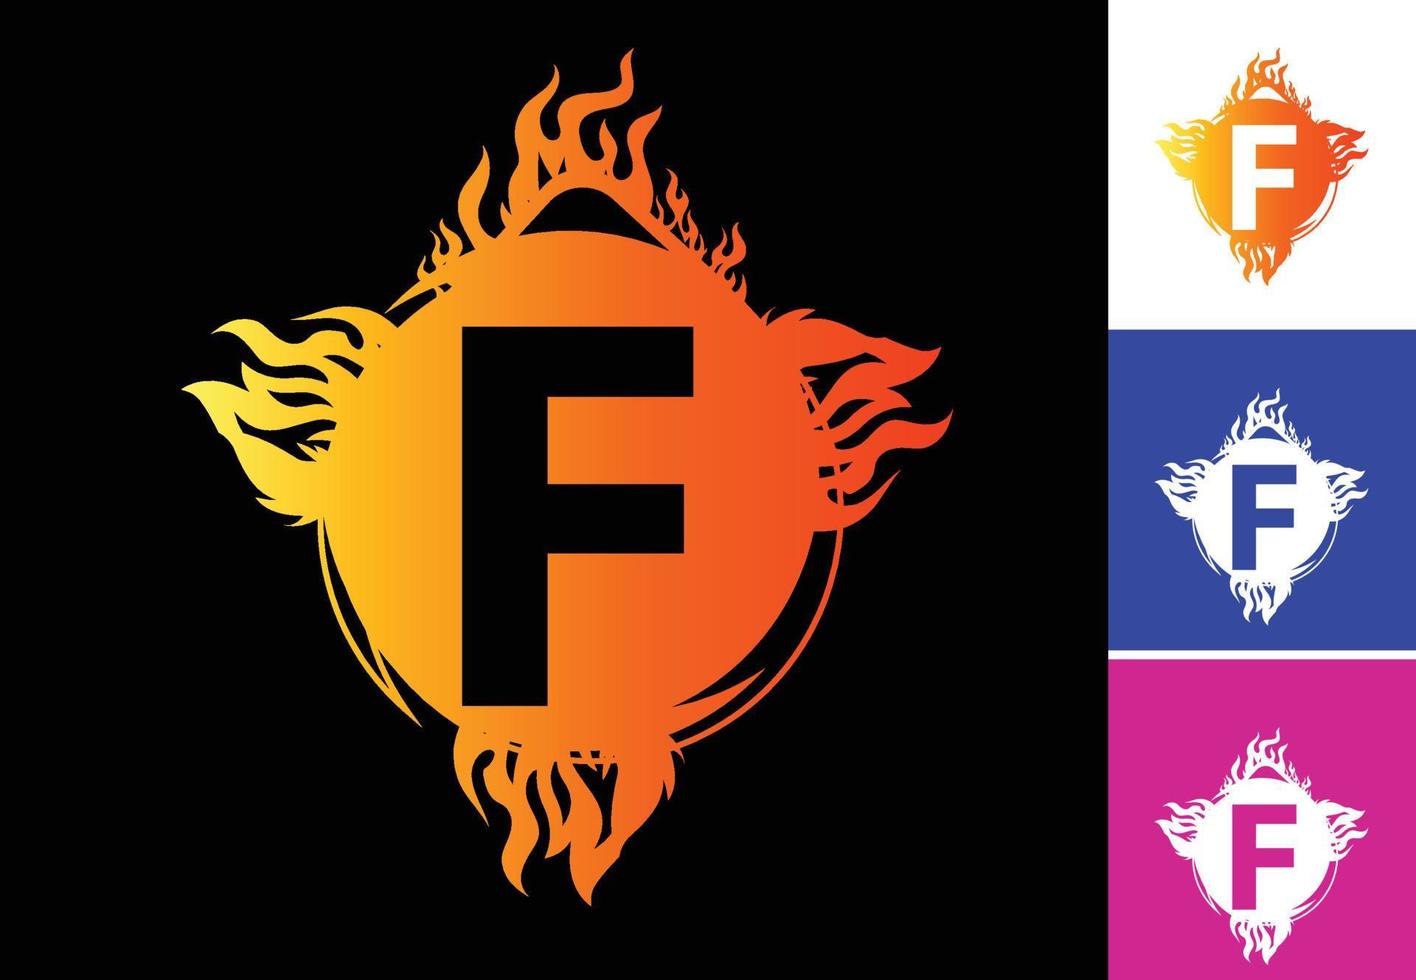 Fire F letter logo and icon design template vector